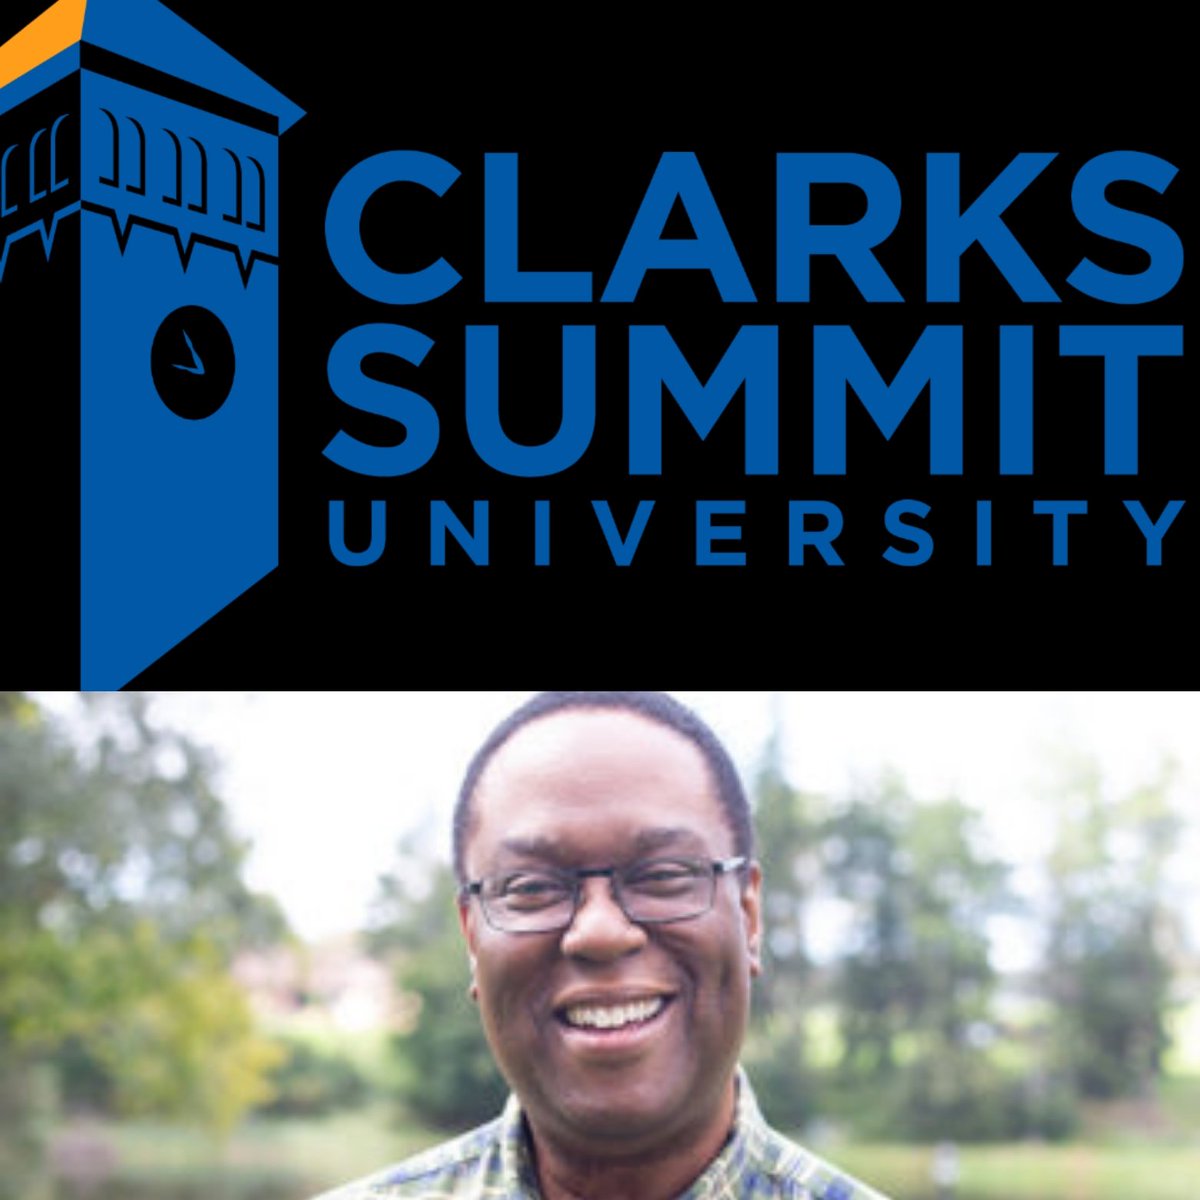 Episode 42 - B!
An intimate discussion with one of my mentors.
Fusionyoungadults.com
@ClarksSummitU
#fusionpodcast #christianpodcast #podcasts #csu #clarkssummituniversity